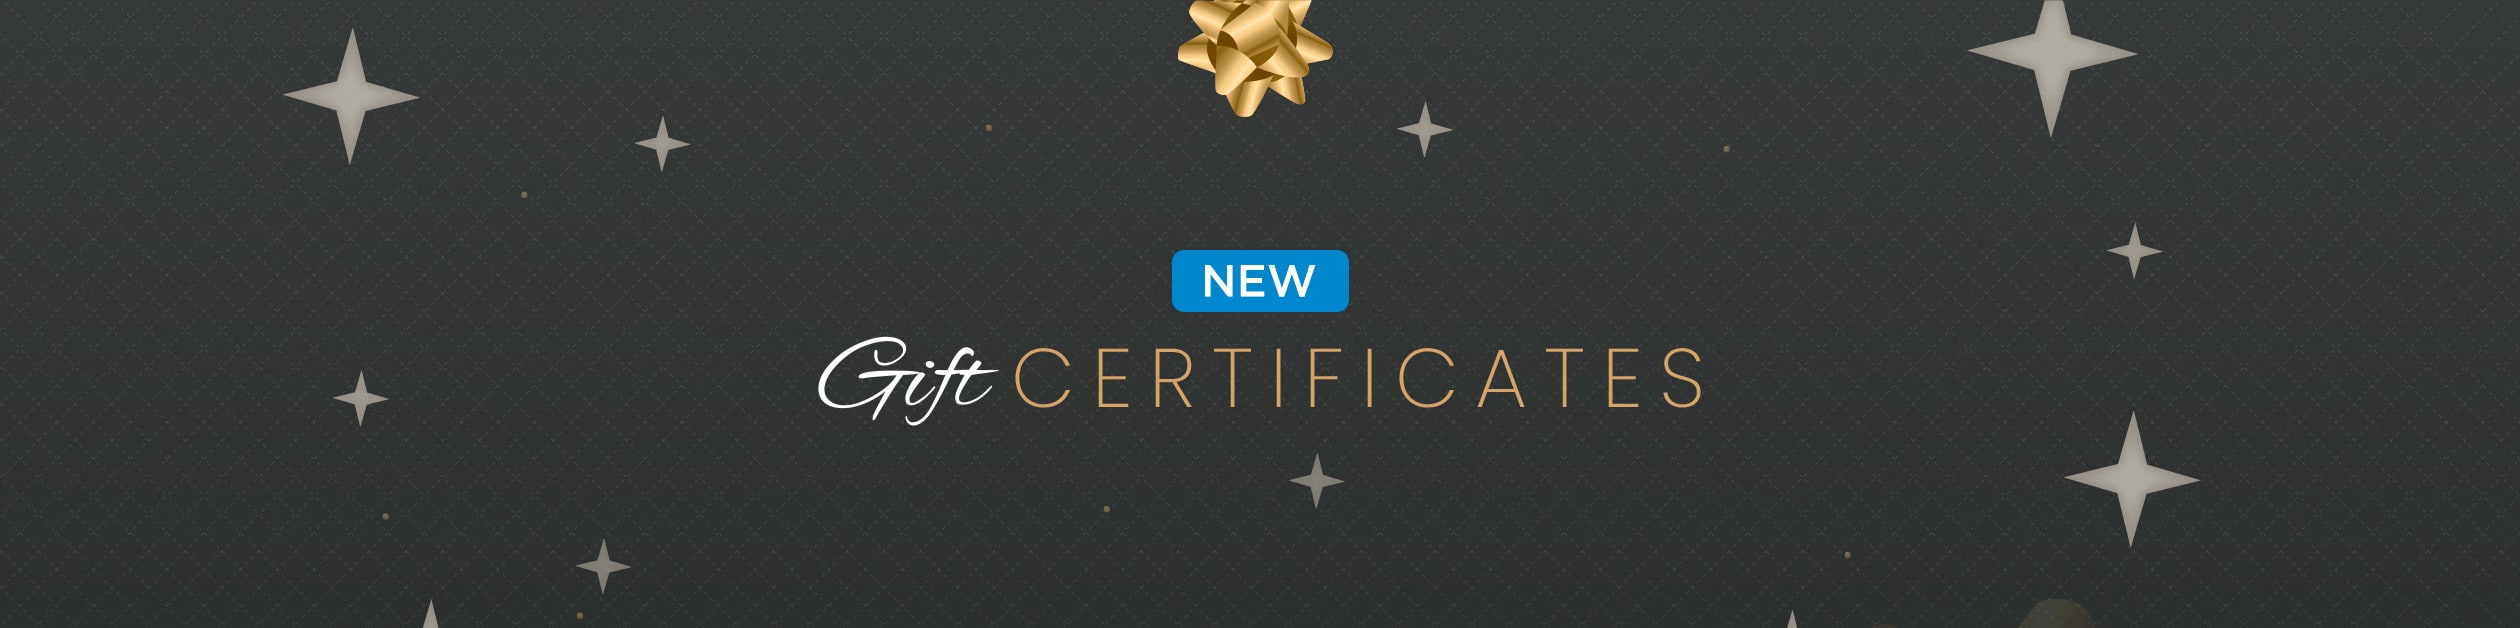 Introducing Menagerie Gift Certificates